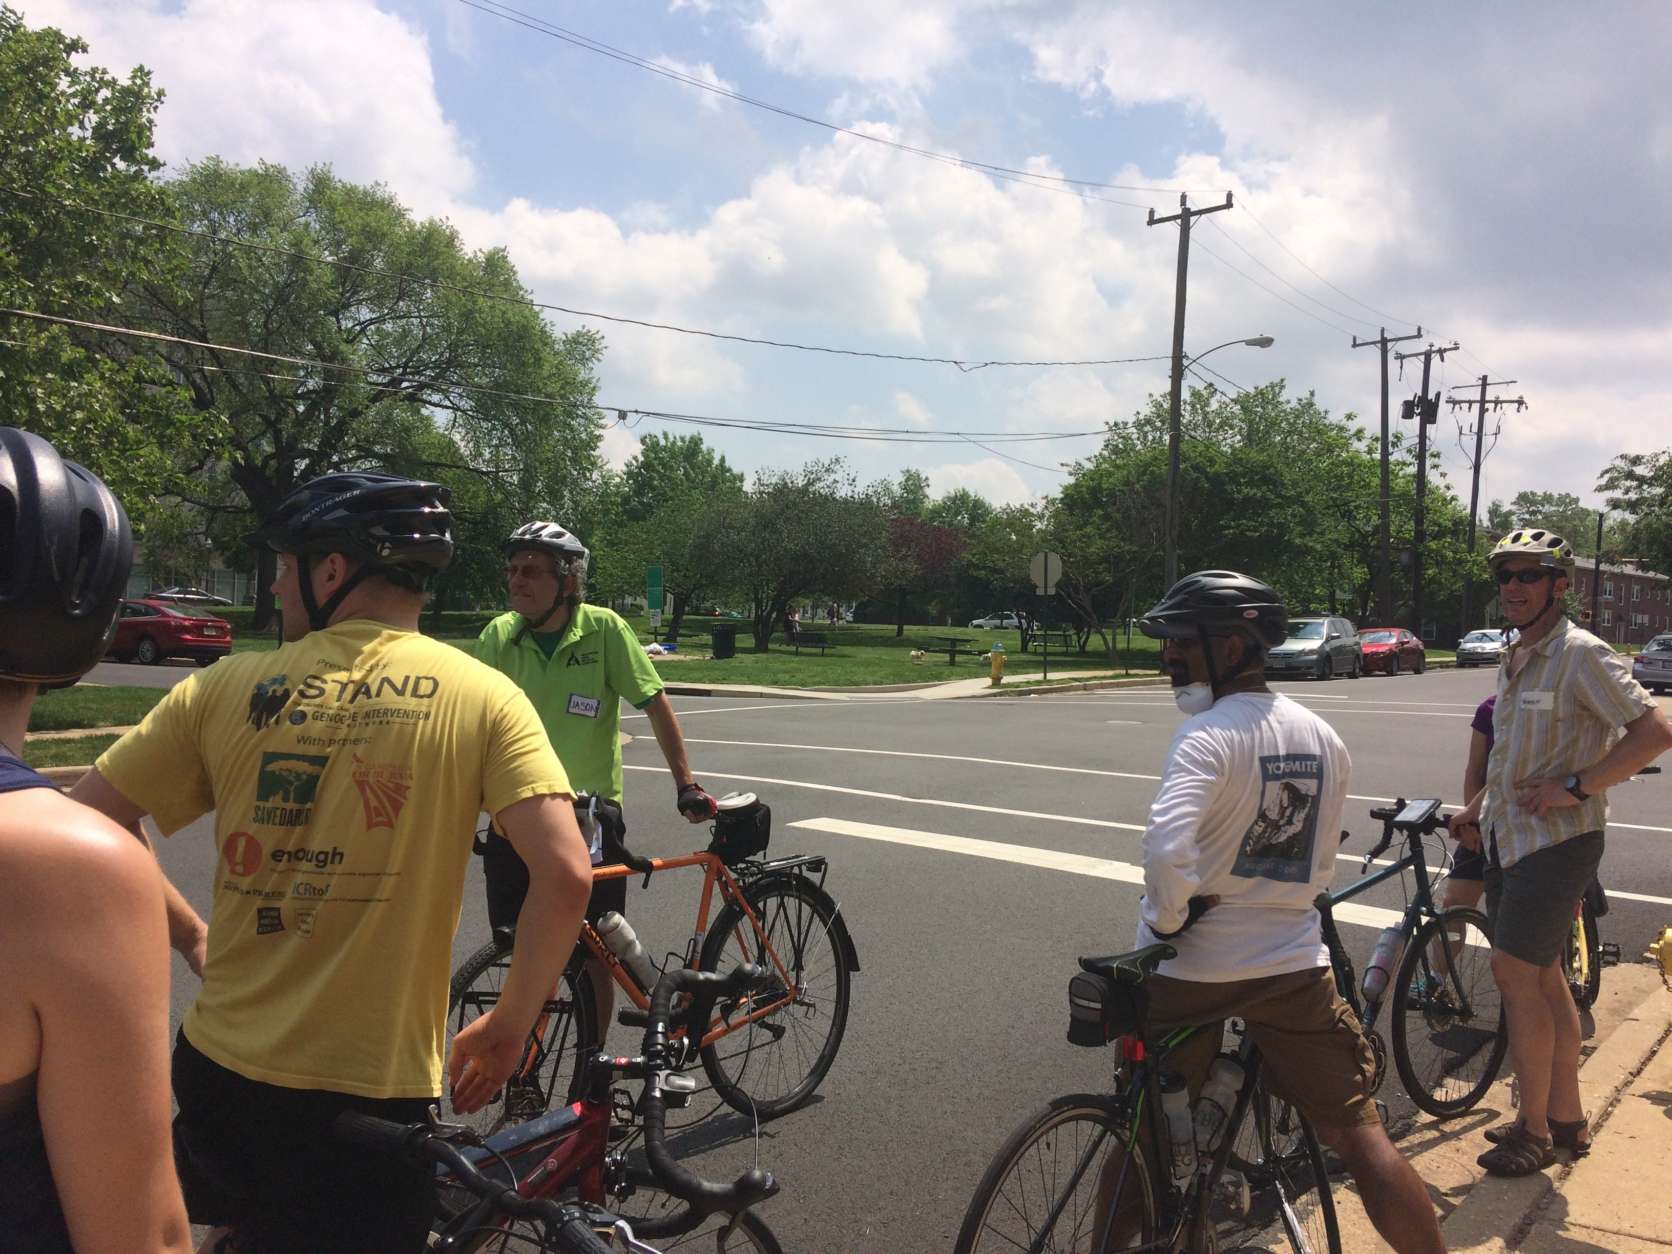 WABA instructor Jason Horowitz leads a group of City Cycling participants on the streets of Arlington, Virginia, on Sunday, April 30, 2017. The City Cycling classes are divided in two sections - fundamental and confidence - and both tracks go for rides after instruction. (WTOP/Abigail Constantino)